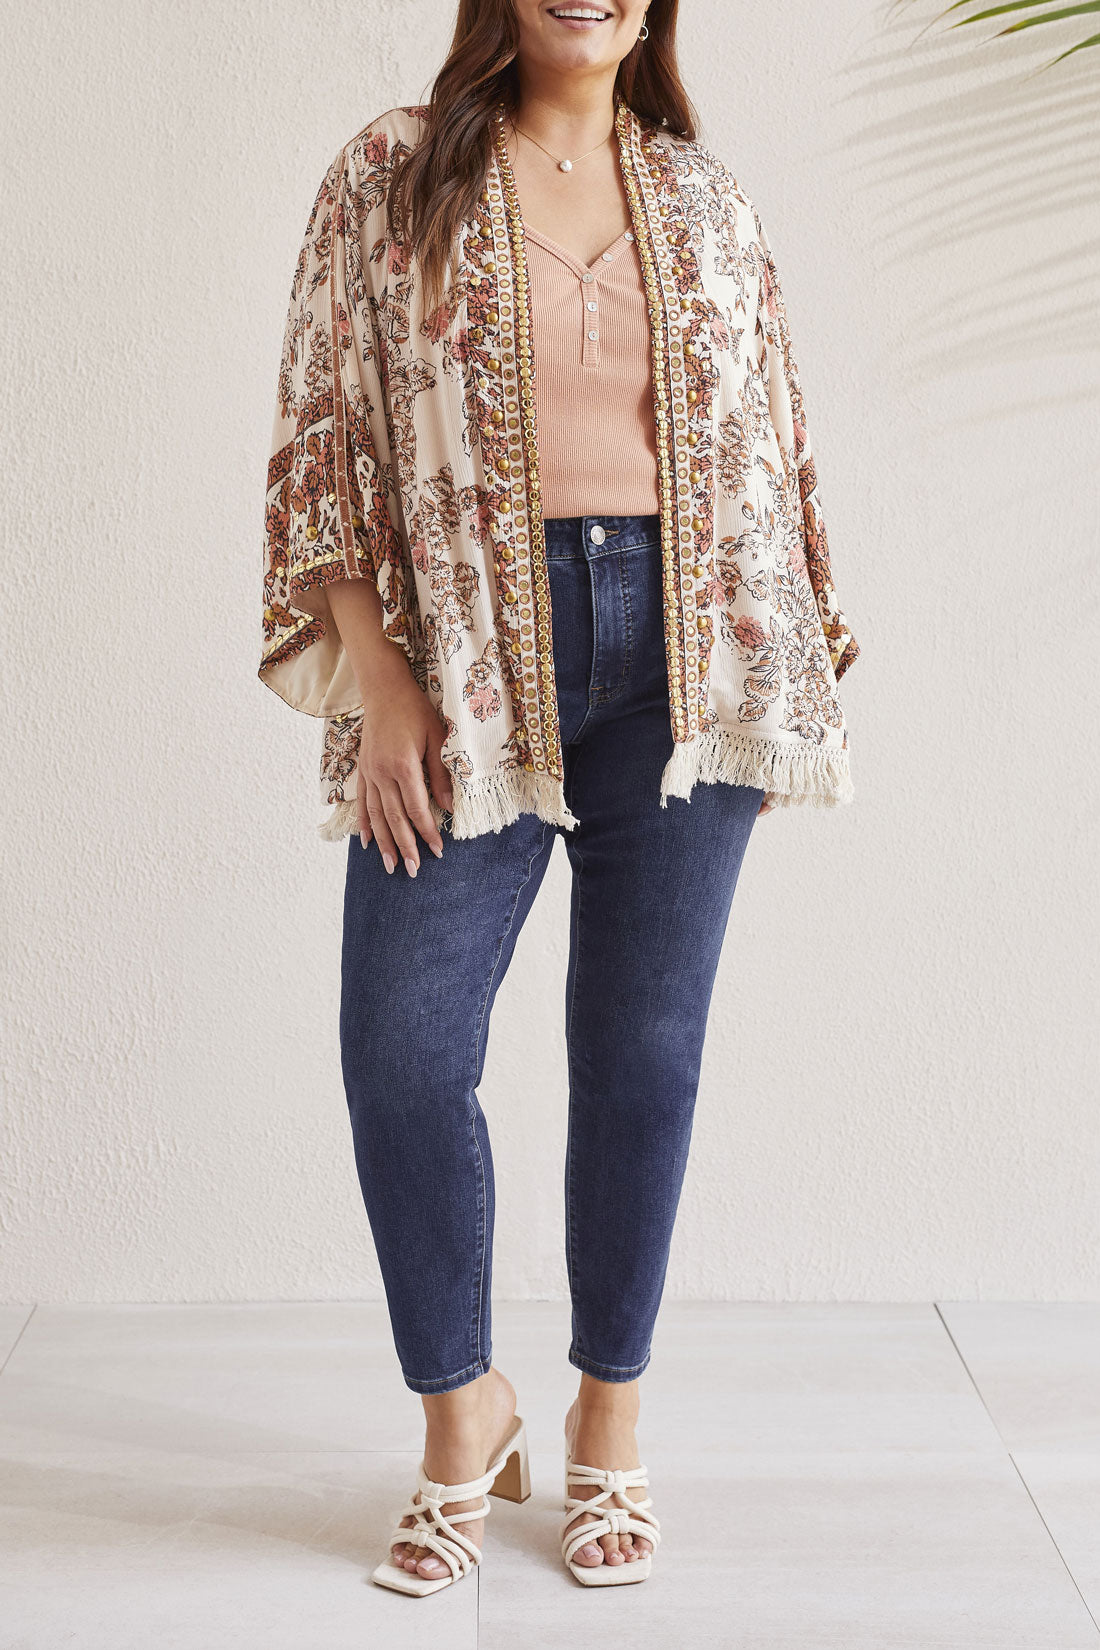 Person wearing a patterned, Tribal Embellished Lined Jacket, blue jeans, and white sandals.